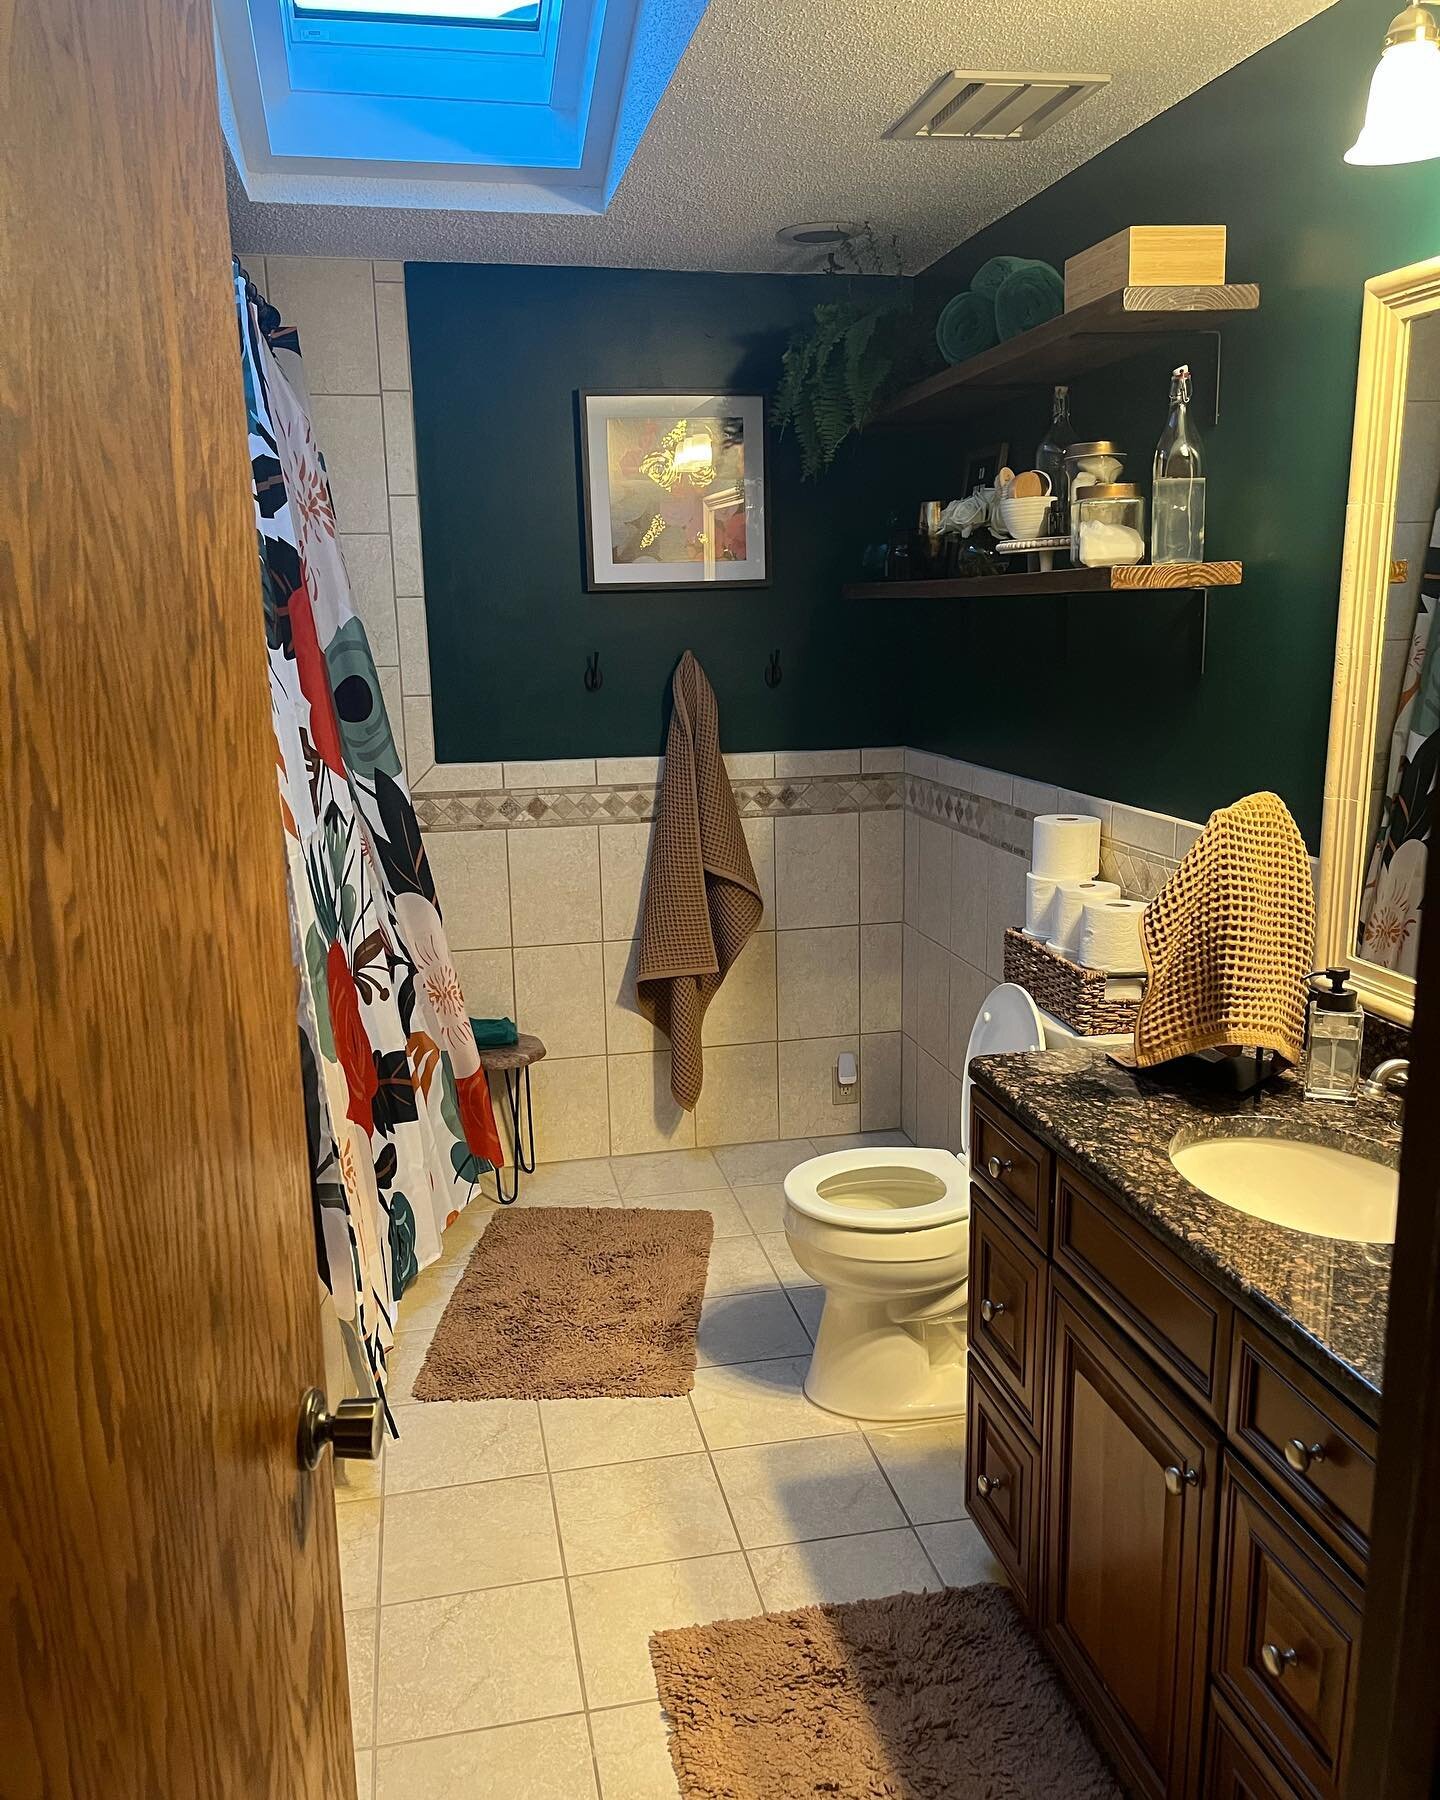 Look at how good @wickwhack did re-doing our bathroom 😍😍😍

Also thank you @adatrak for the recent help and great work painting the entry way and kitchen!